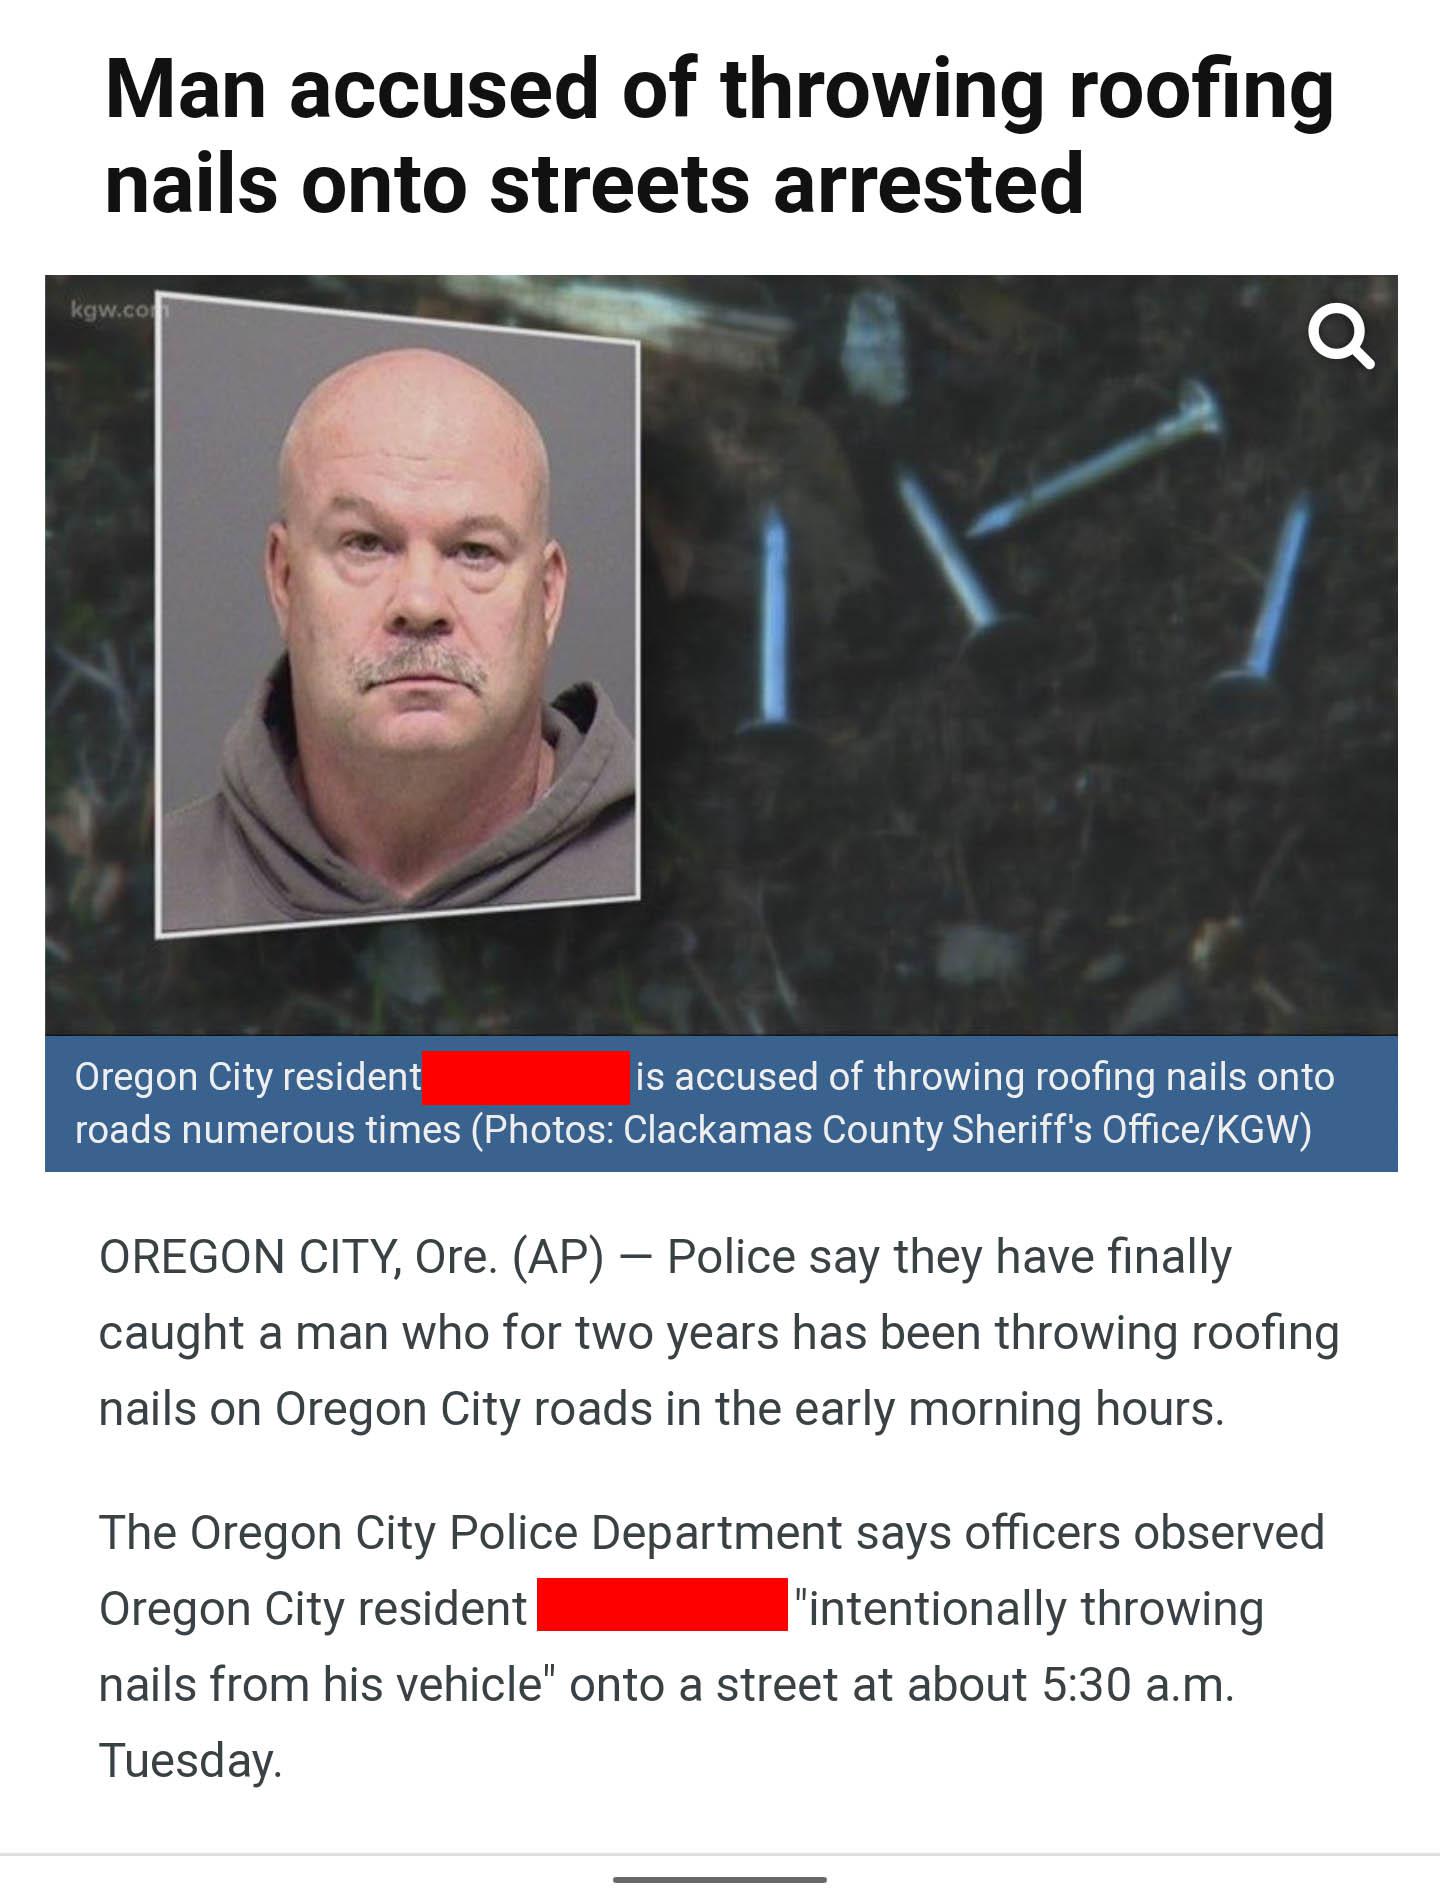 nail bandit oregon city - Man accused of throwing roofing nails onto streets arrested kgw.co Oregon City resident is accused of throwing roofing nails onto roads numerous times Photos Clackamas County Sheriff's OfficeKgw Oregon City, Ore. Ap Police say th